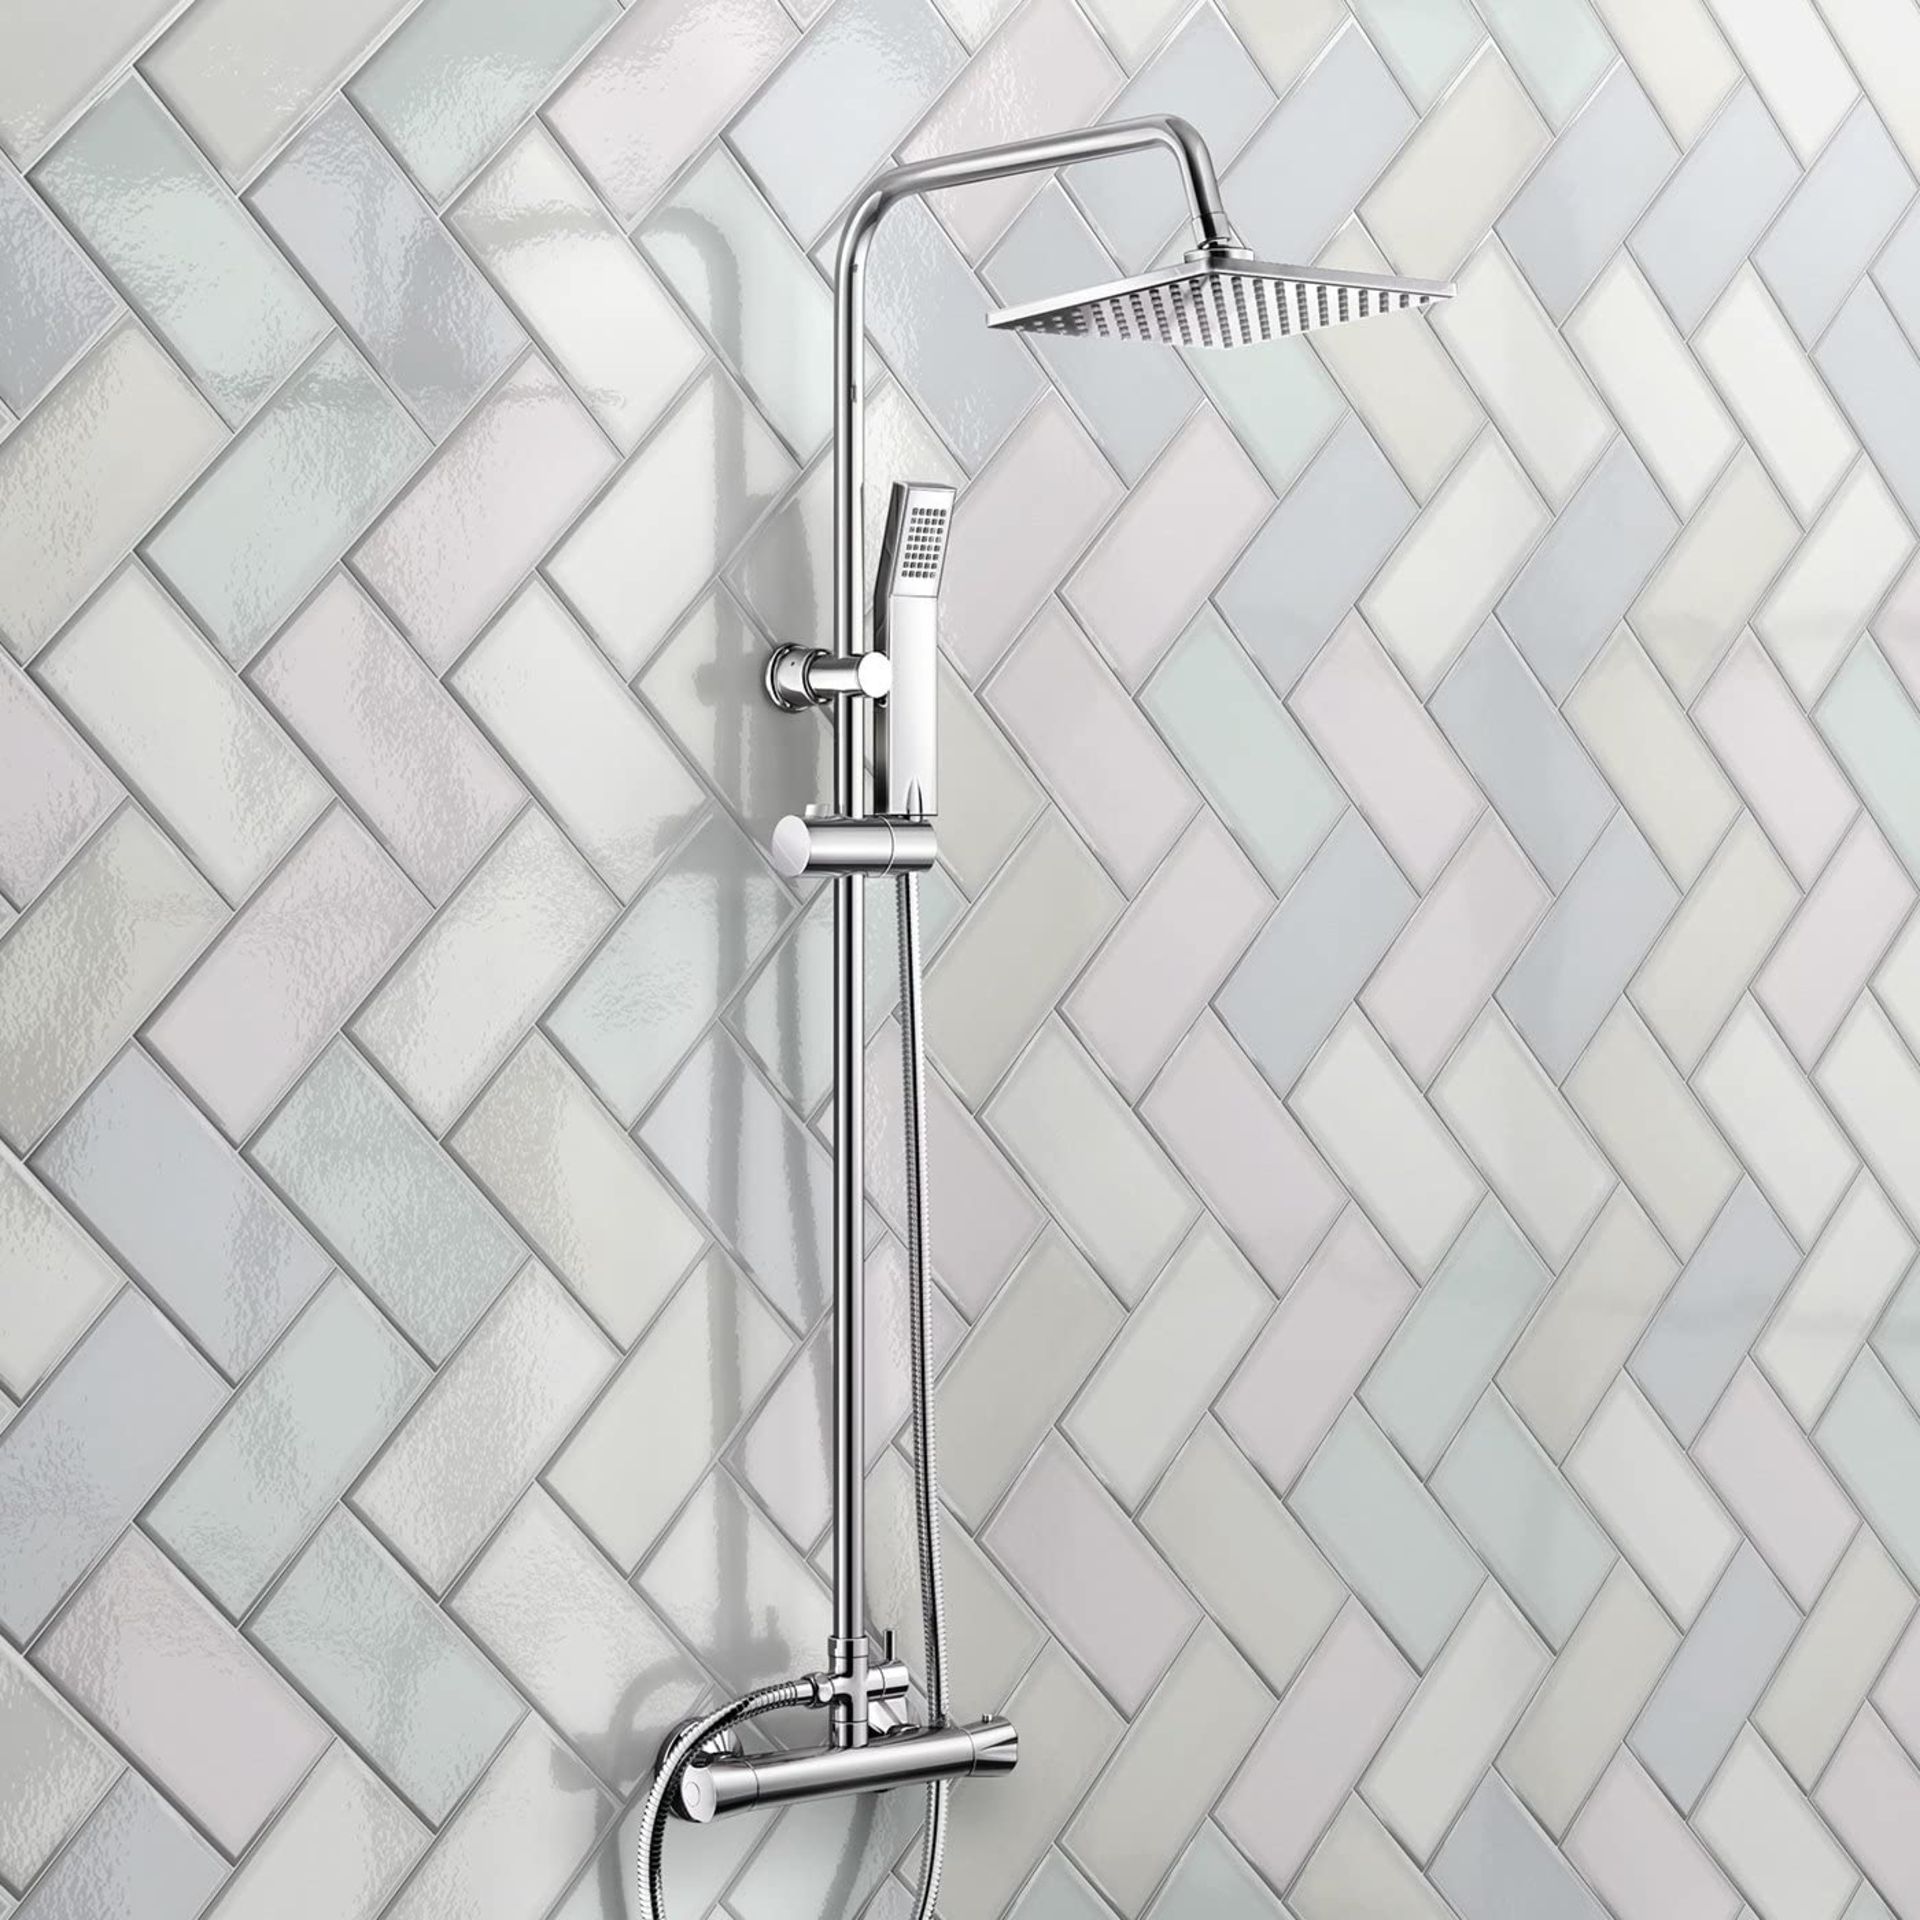 New & Boxed Exposed Thermostatic 2-Way Bar Mixer Shower Set Chrome Valve 200 mm Square Head +